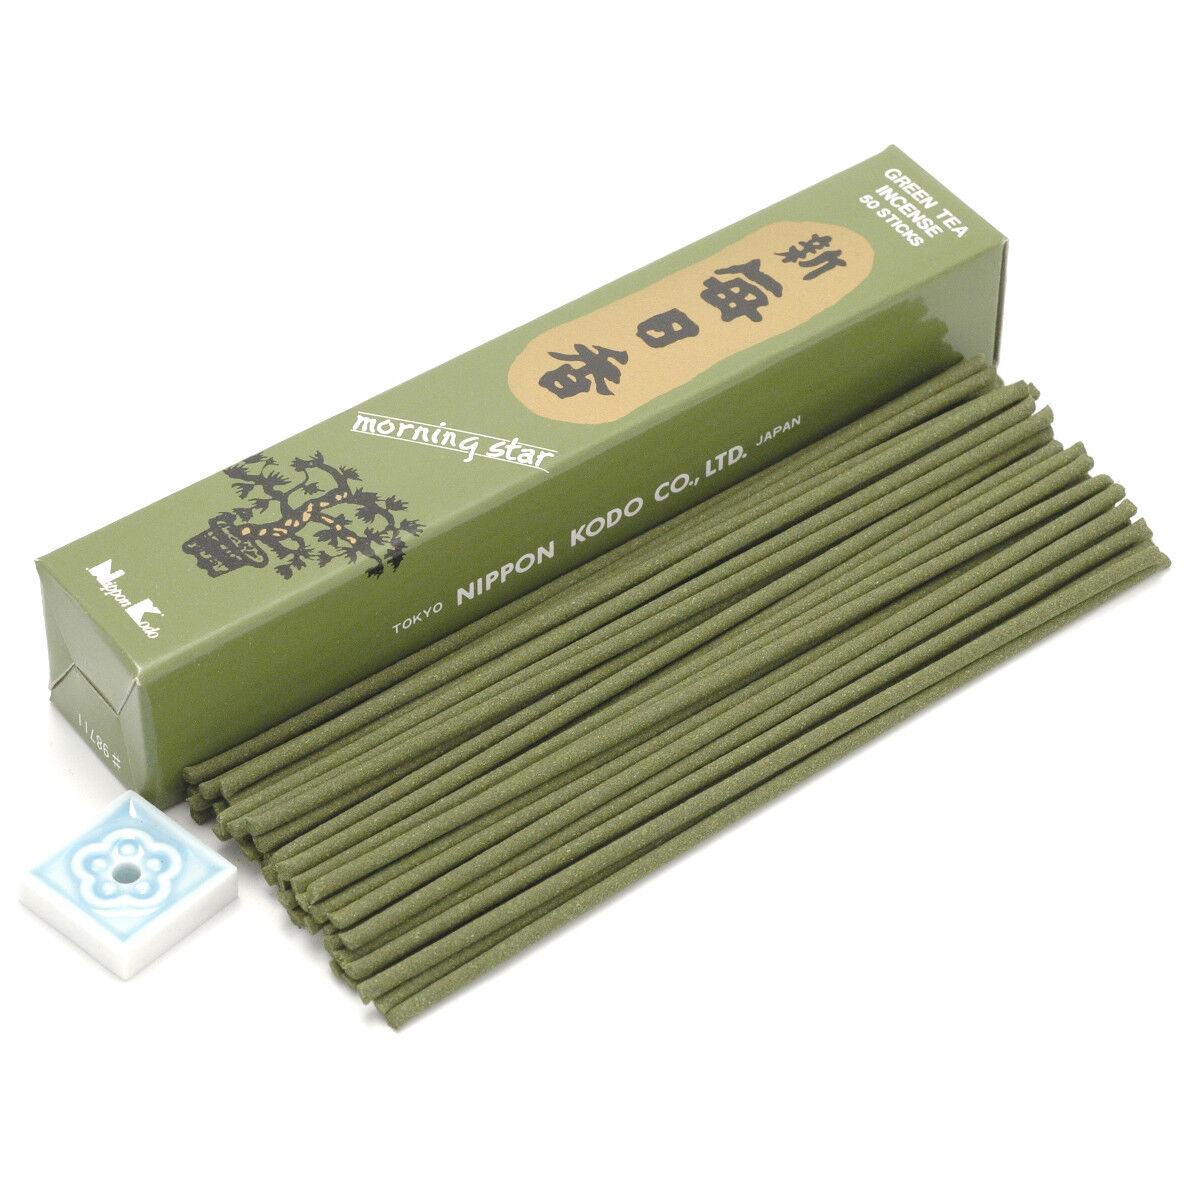 Japanese incense is arguably the finest in the world and Morning Star Incense is established as one of the best and most popular of all Japanese incense. This high-quality incense was created in the 1960s and is regarded as the perfect everyday incense. It is adored by both the Japanese and people all over the world. This exquisite product is made by Nippon Kodo - a company that has been producing the best quality incenses for over 400 years.